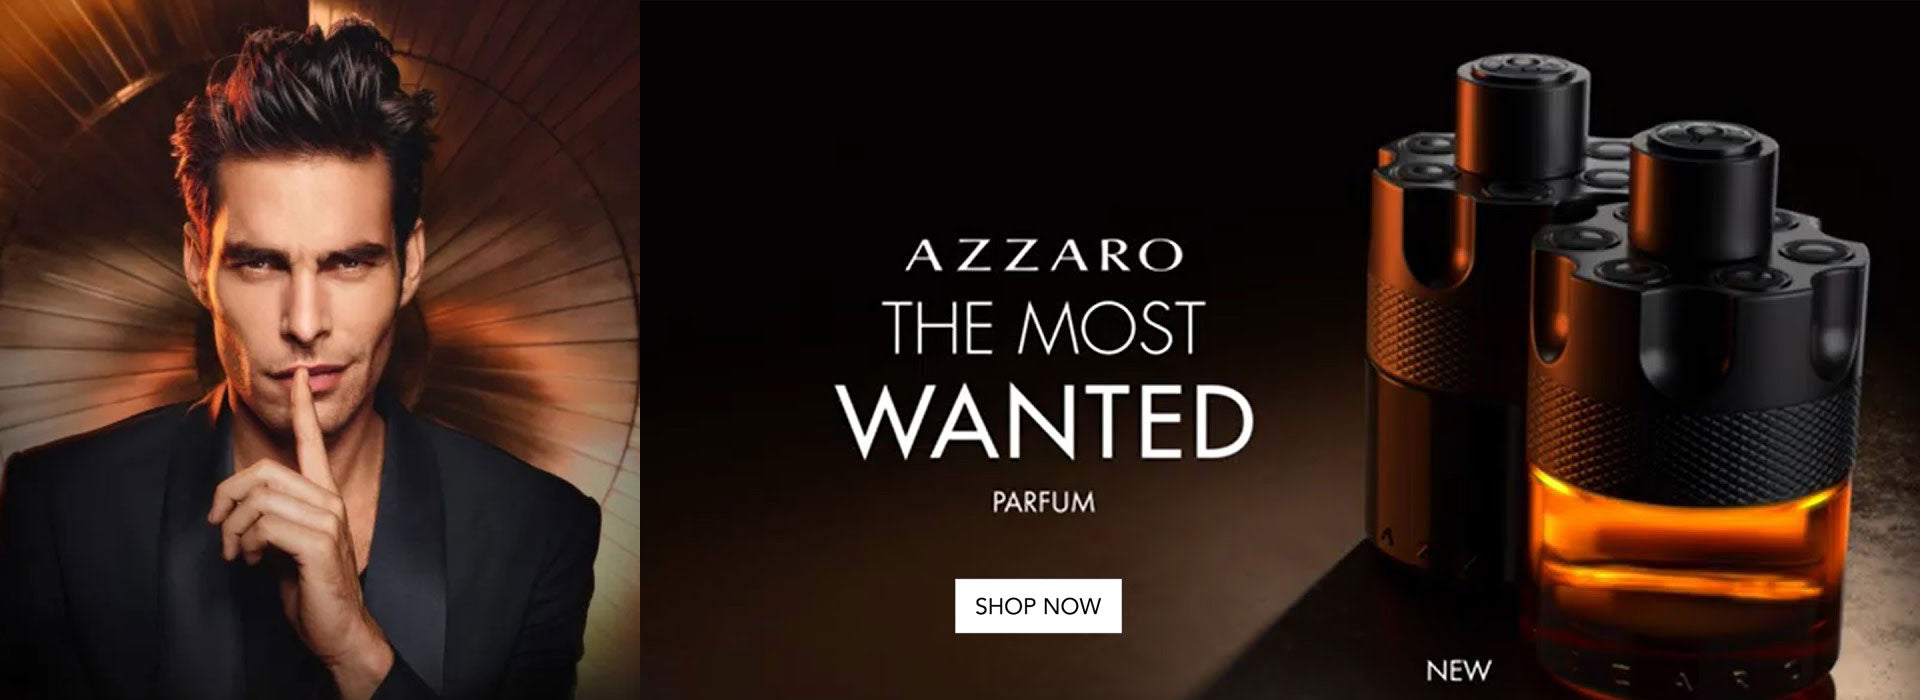 Shop complete range of AZZARO at THE PERFUME WORLD